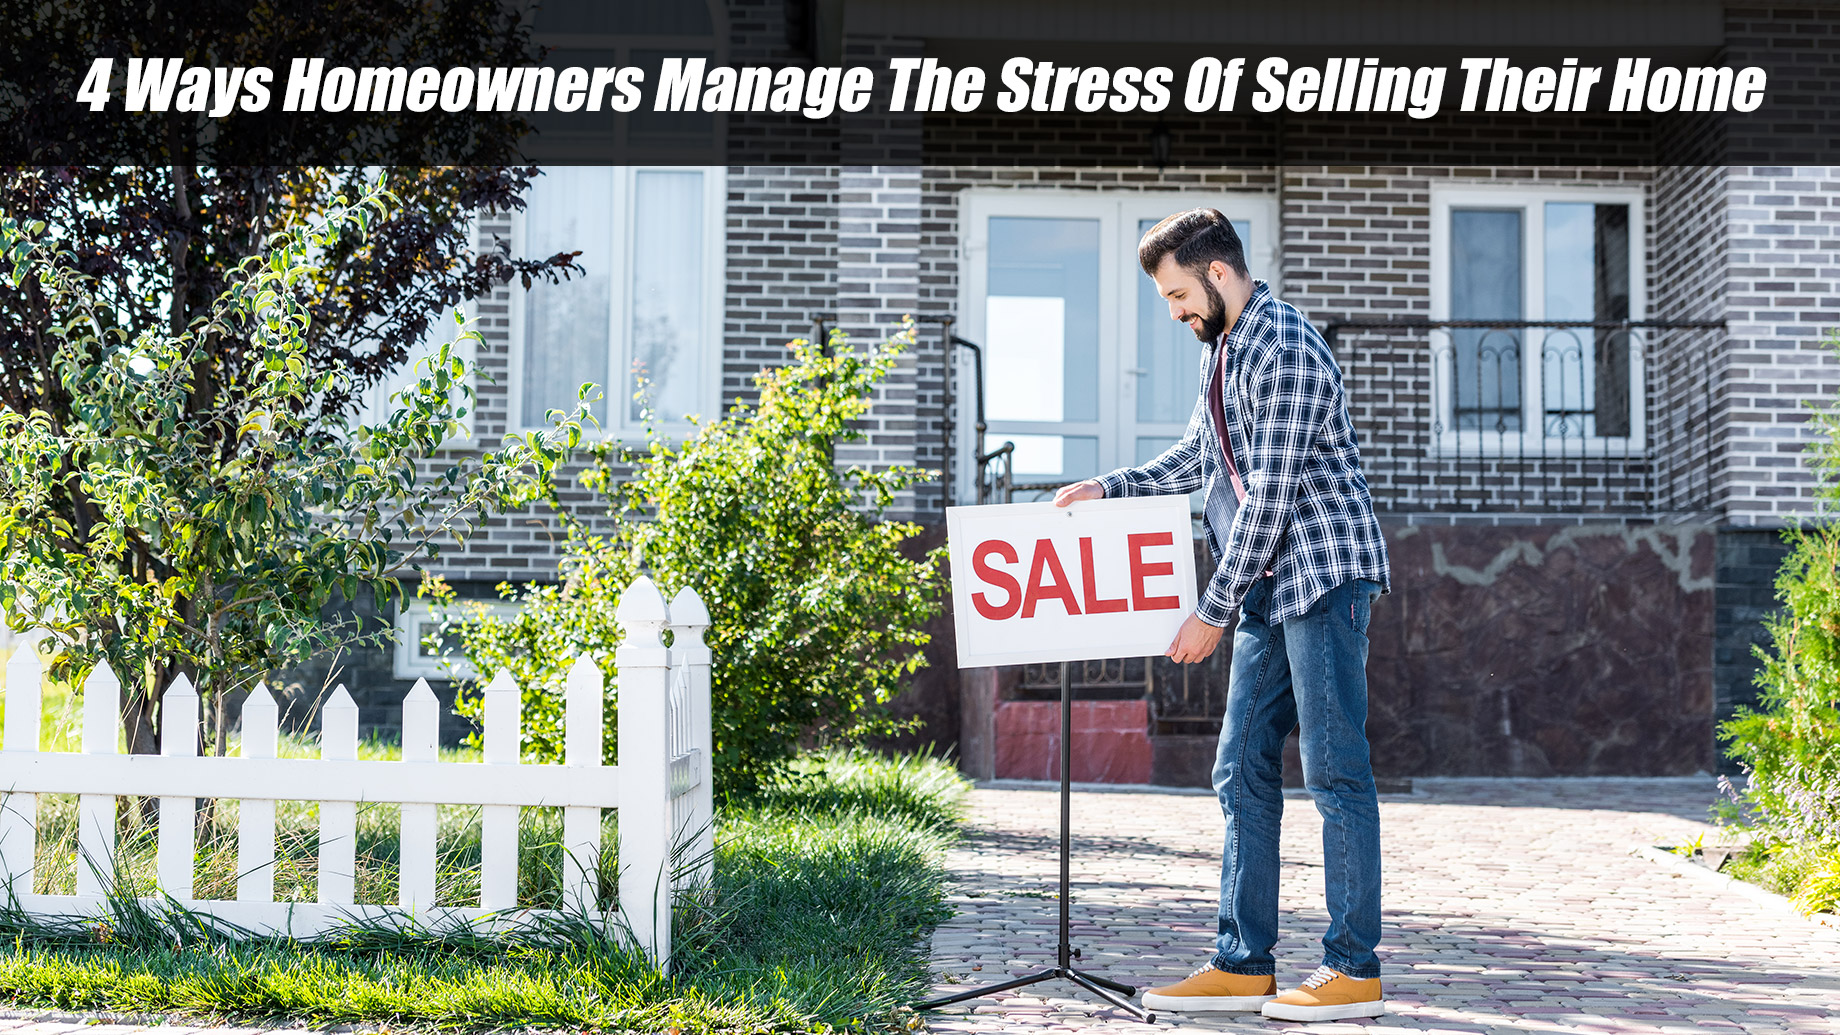 4 Ways Homeowners Manage The Stress Of Selling Their Home